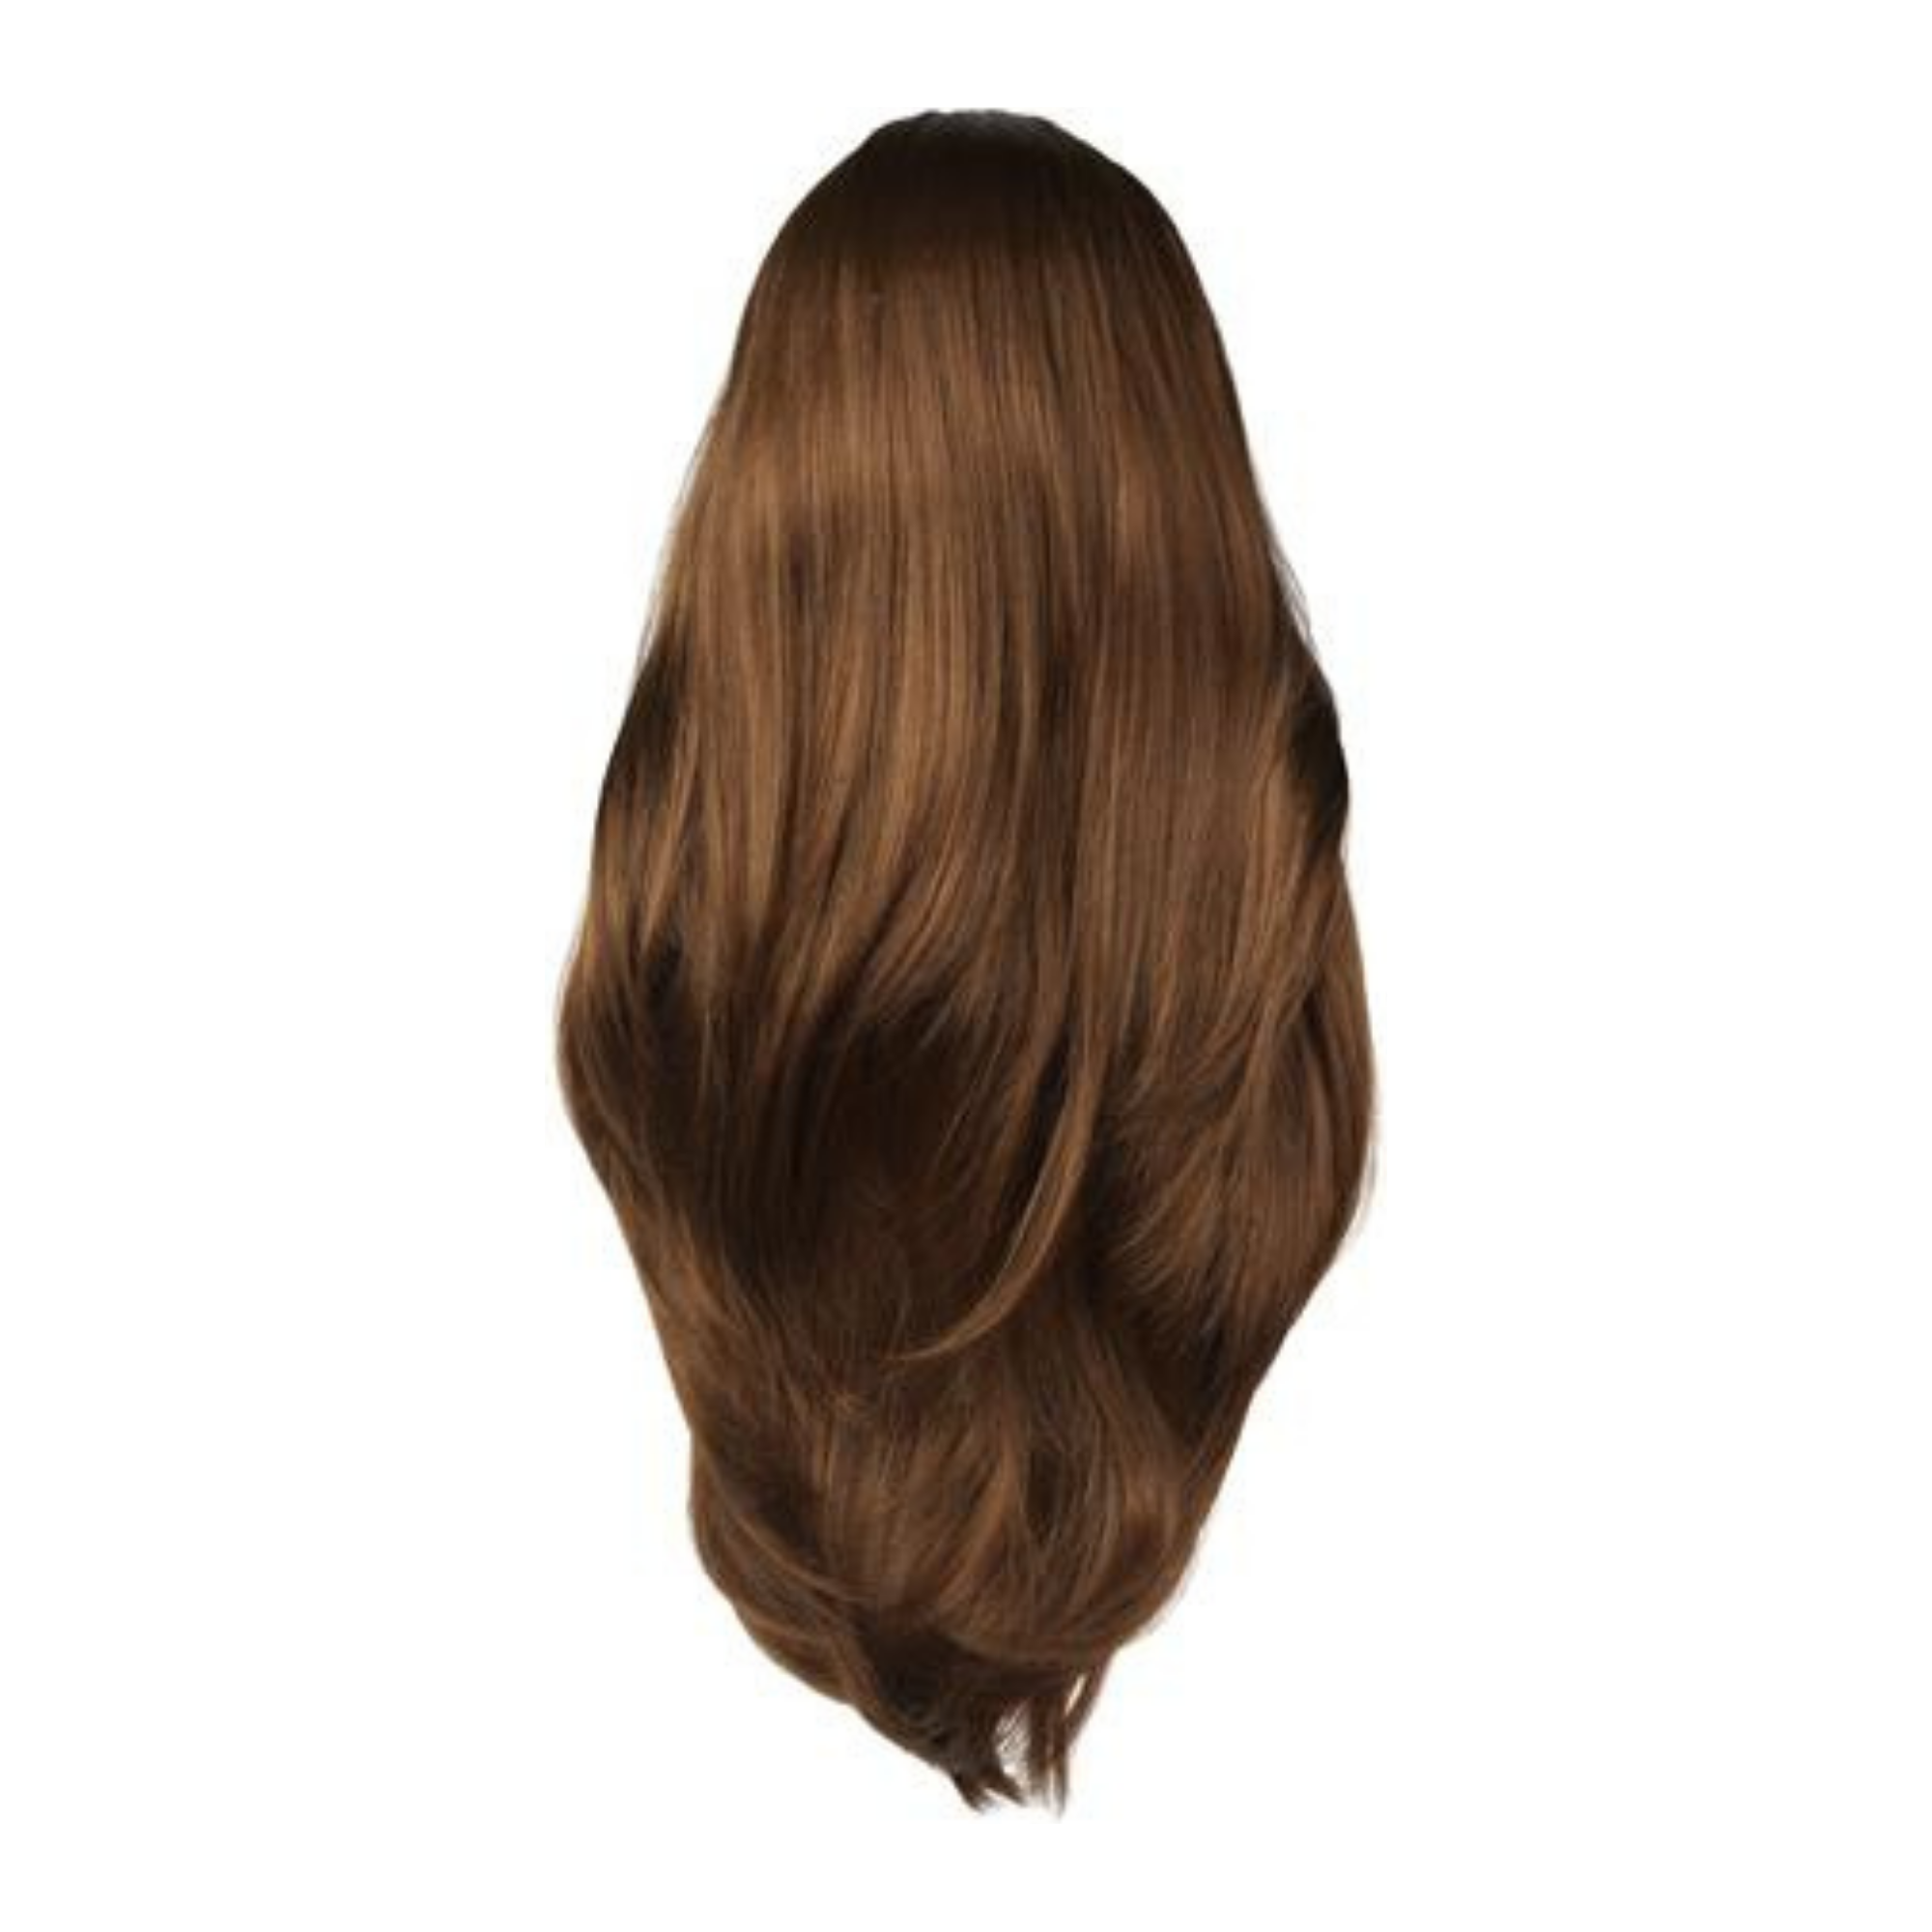 image of hair rehab london half wig hairpiece in shade natural